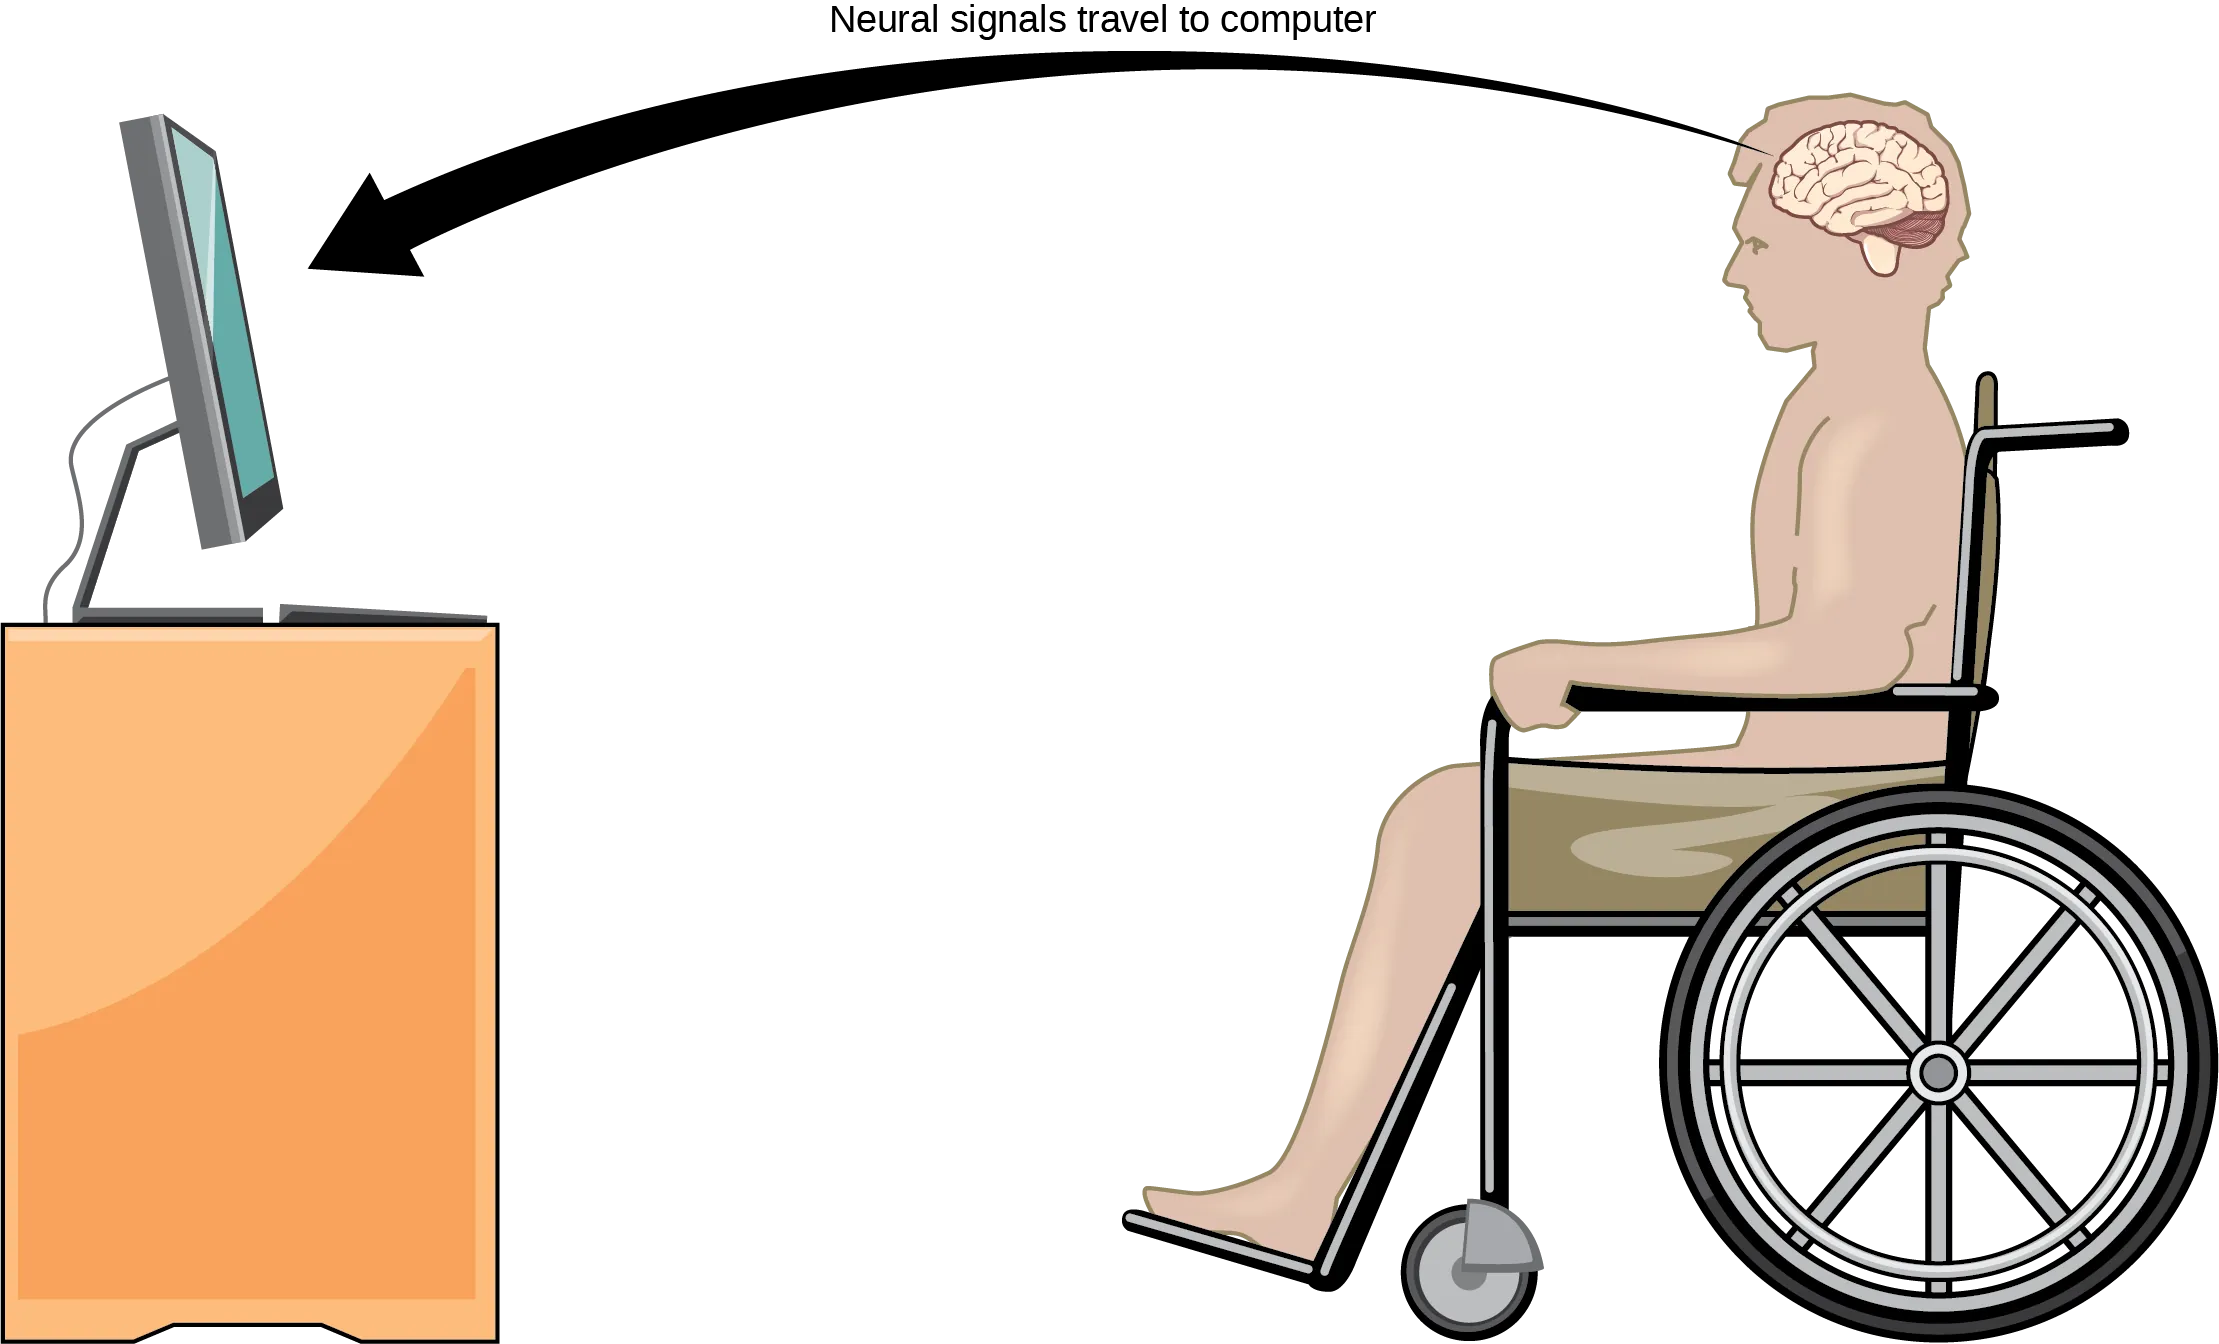 Illustration shows a person in a wheelchair, facing a computer screen. An arrow indicates that neural signals travel from the brain of the paralyzed person to the computer.